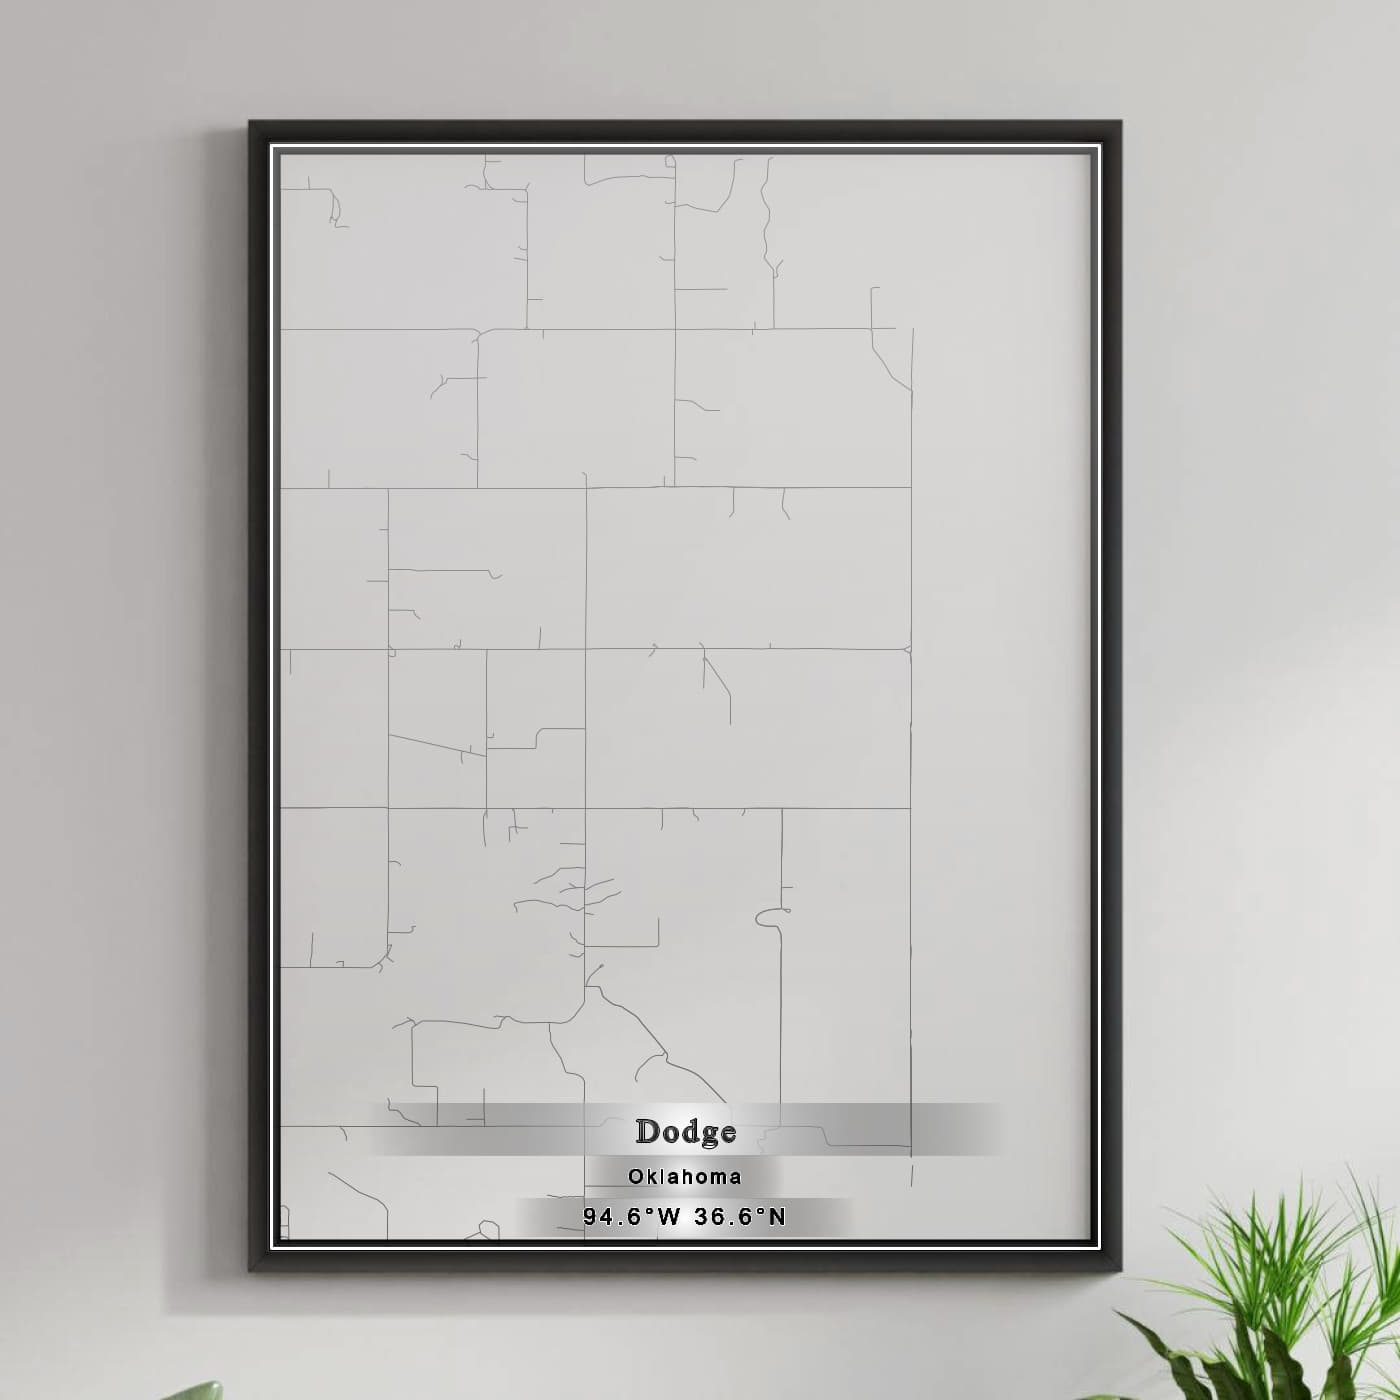 ROAD MAP OF DODGE, OKLAHOMA BY MAPBAKES